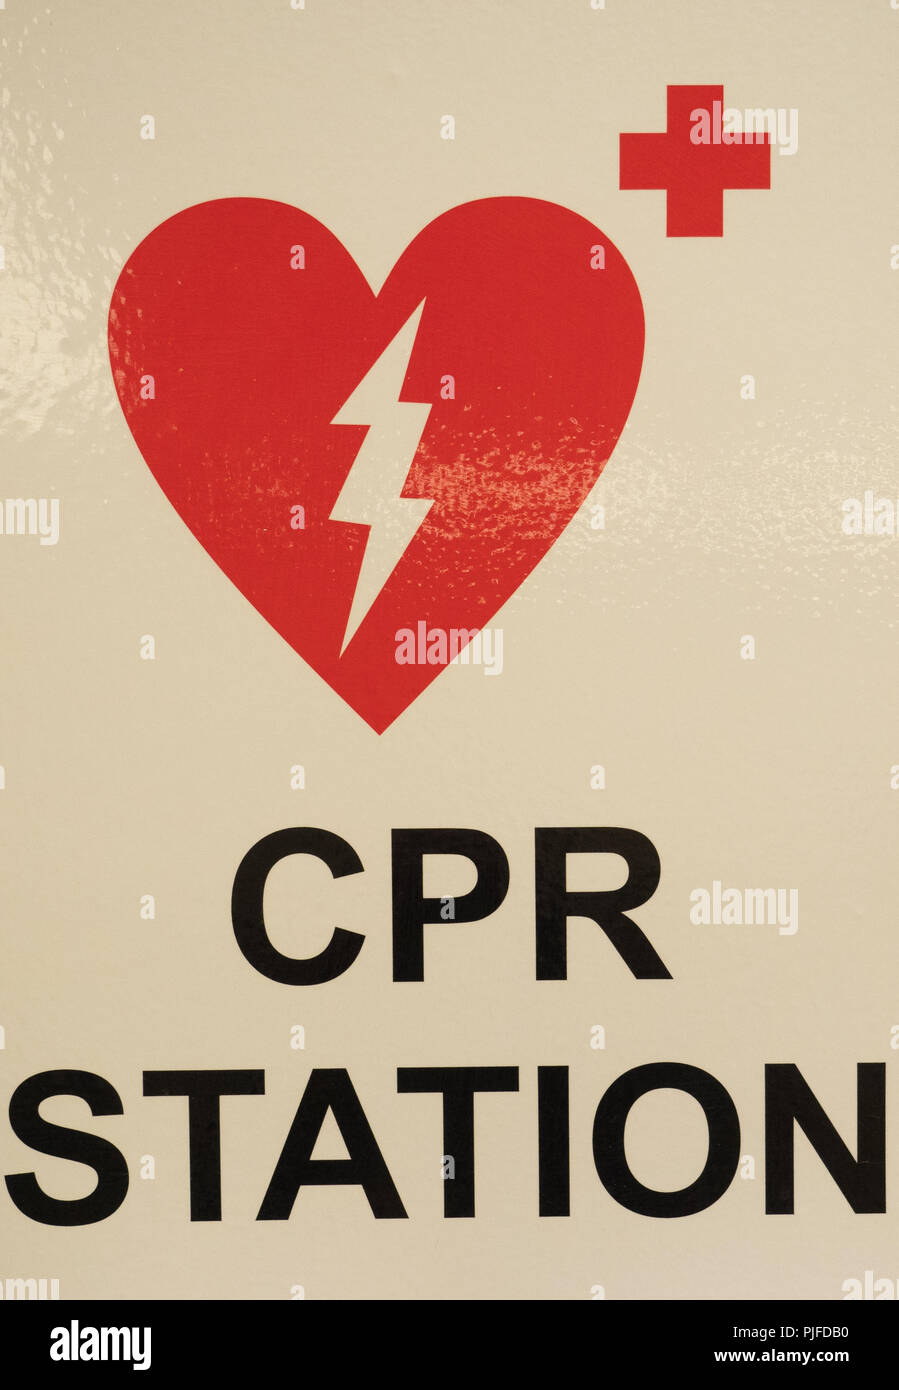 A CPR station sign with a heart, electric shock and red cross design of red on white. Stock Photo